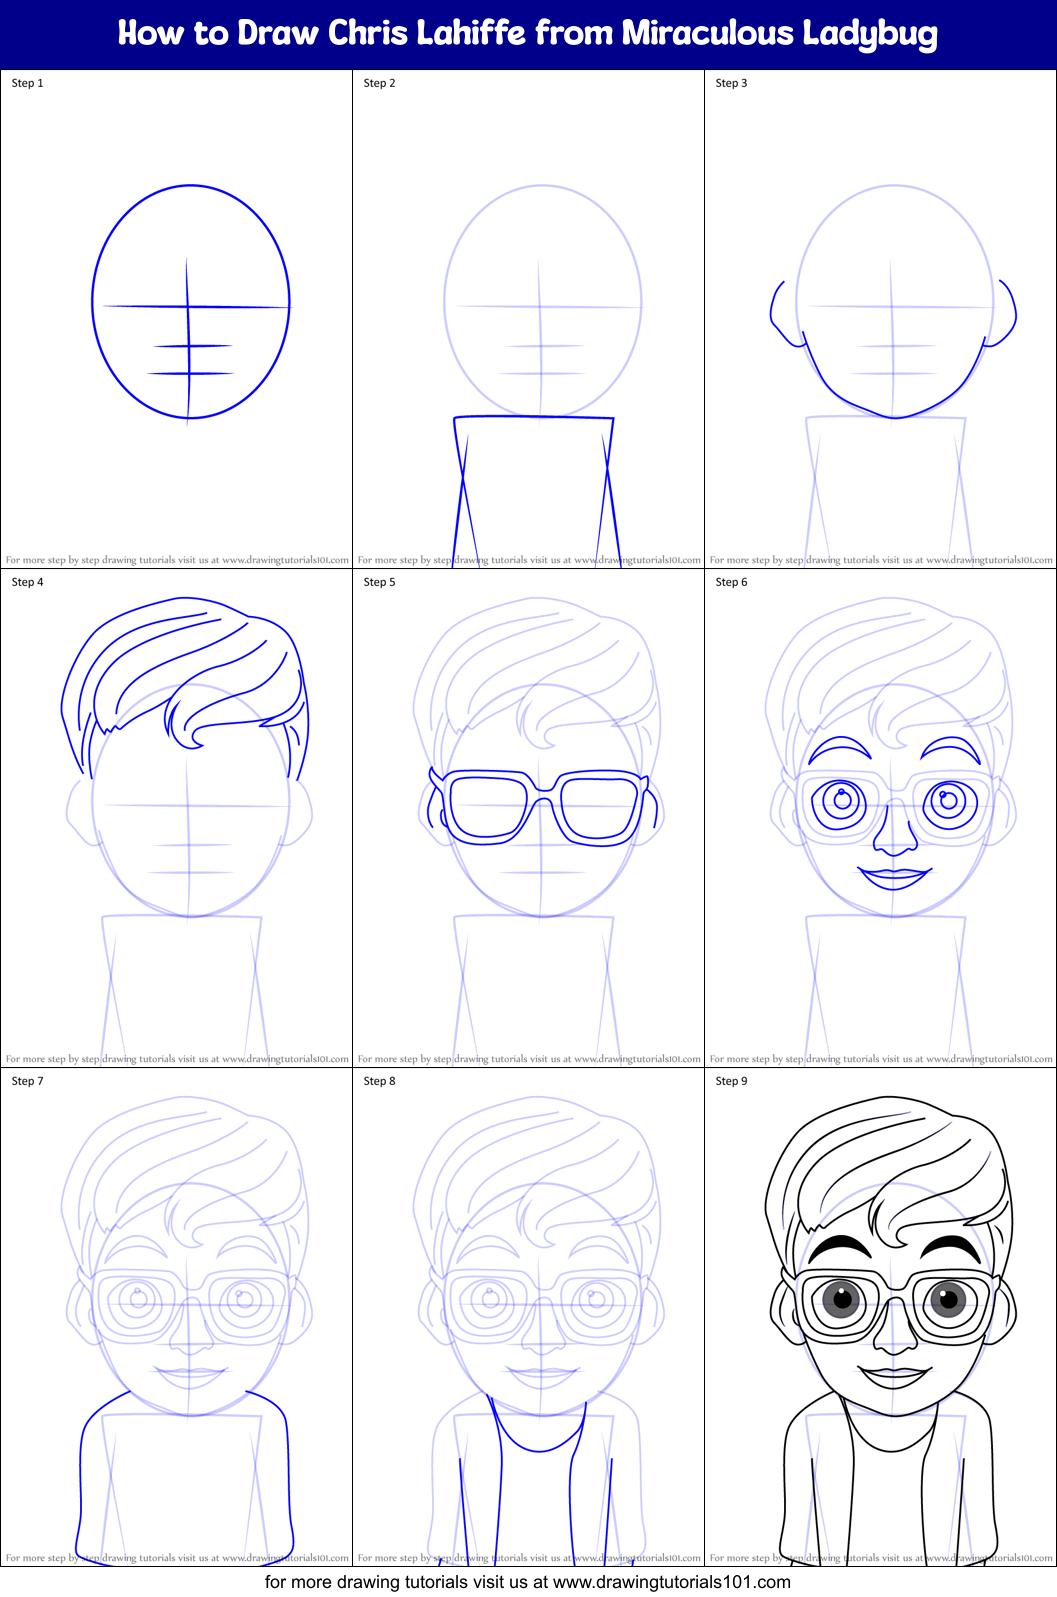 How to Draw Chris Lahiffe from Miraculous Ladybug printable step by